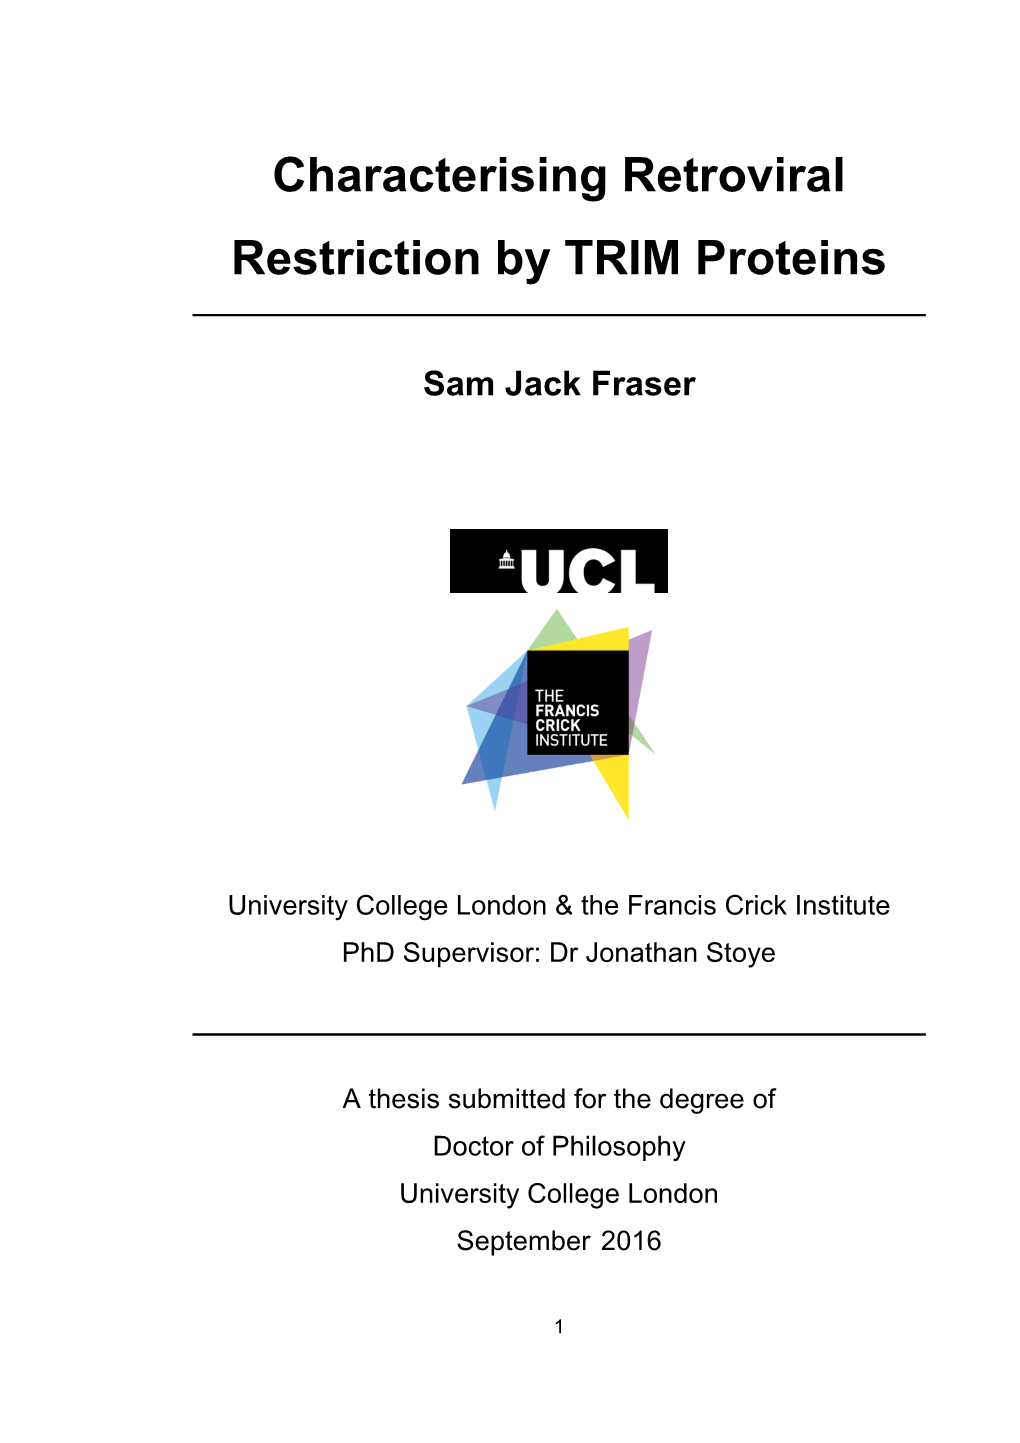 Characterising Retroviral Restriction by TRIM Proteins